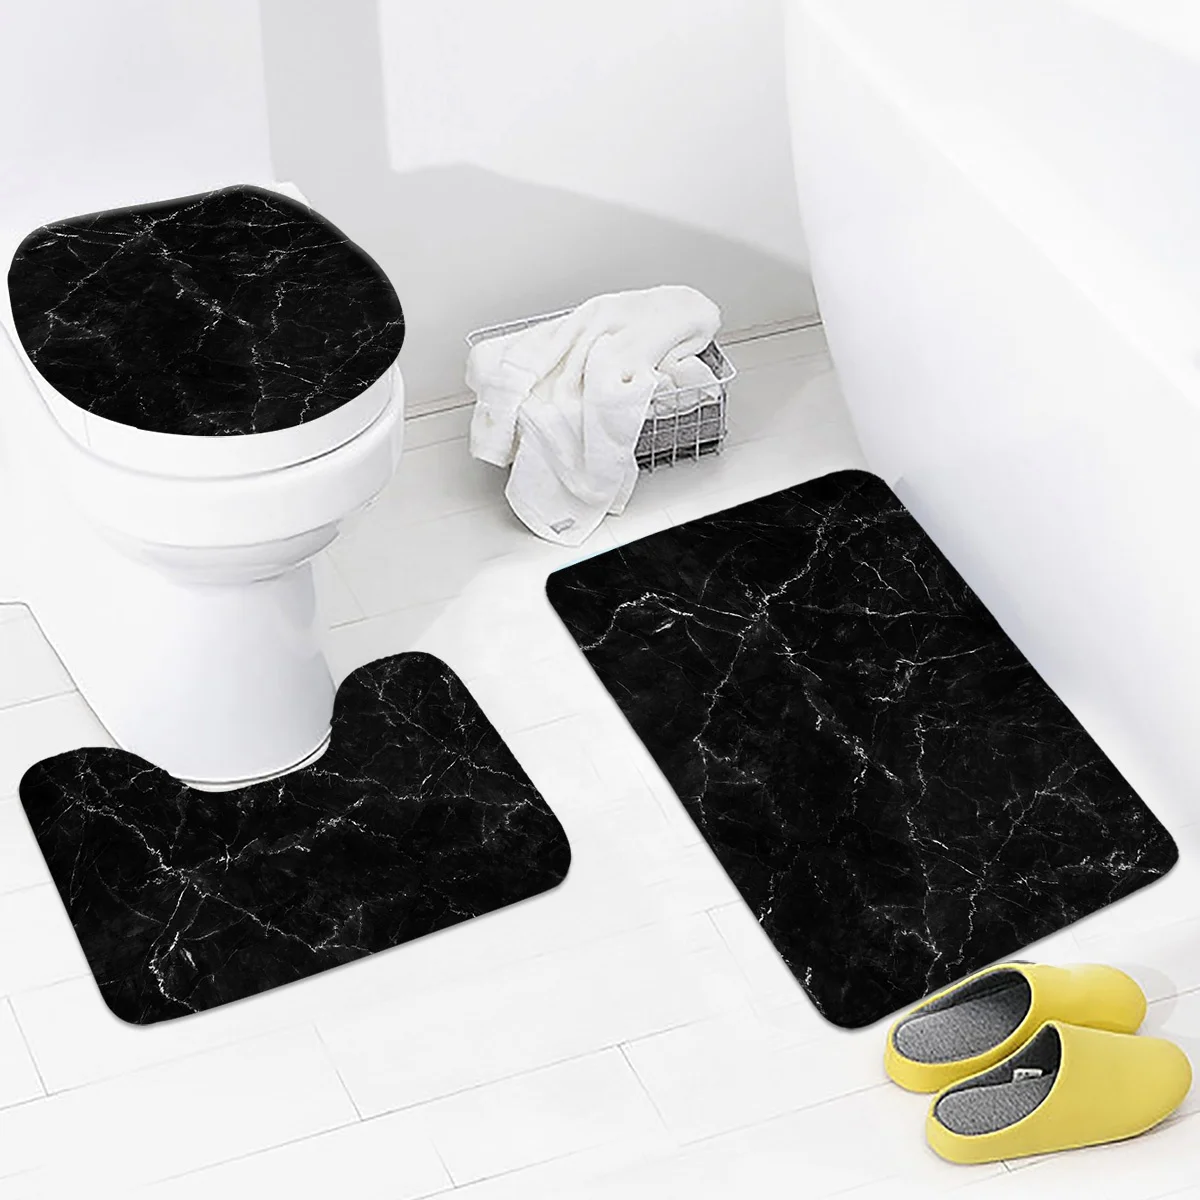 

Digital Printed Black Marble Polyester Custom bath mat Bathroom Sets 3 pieces Rugs Sets Water absorbent cheap price, Customized